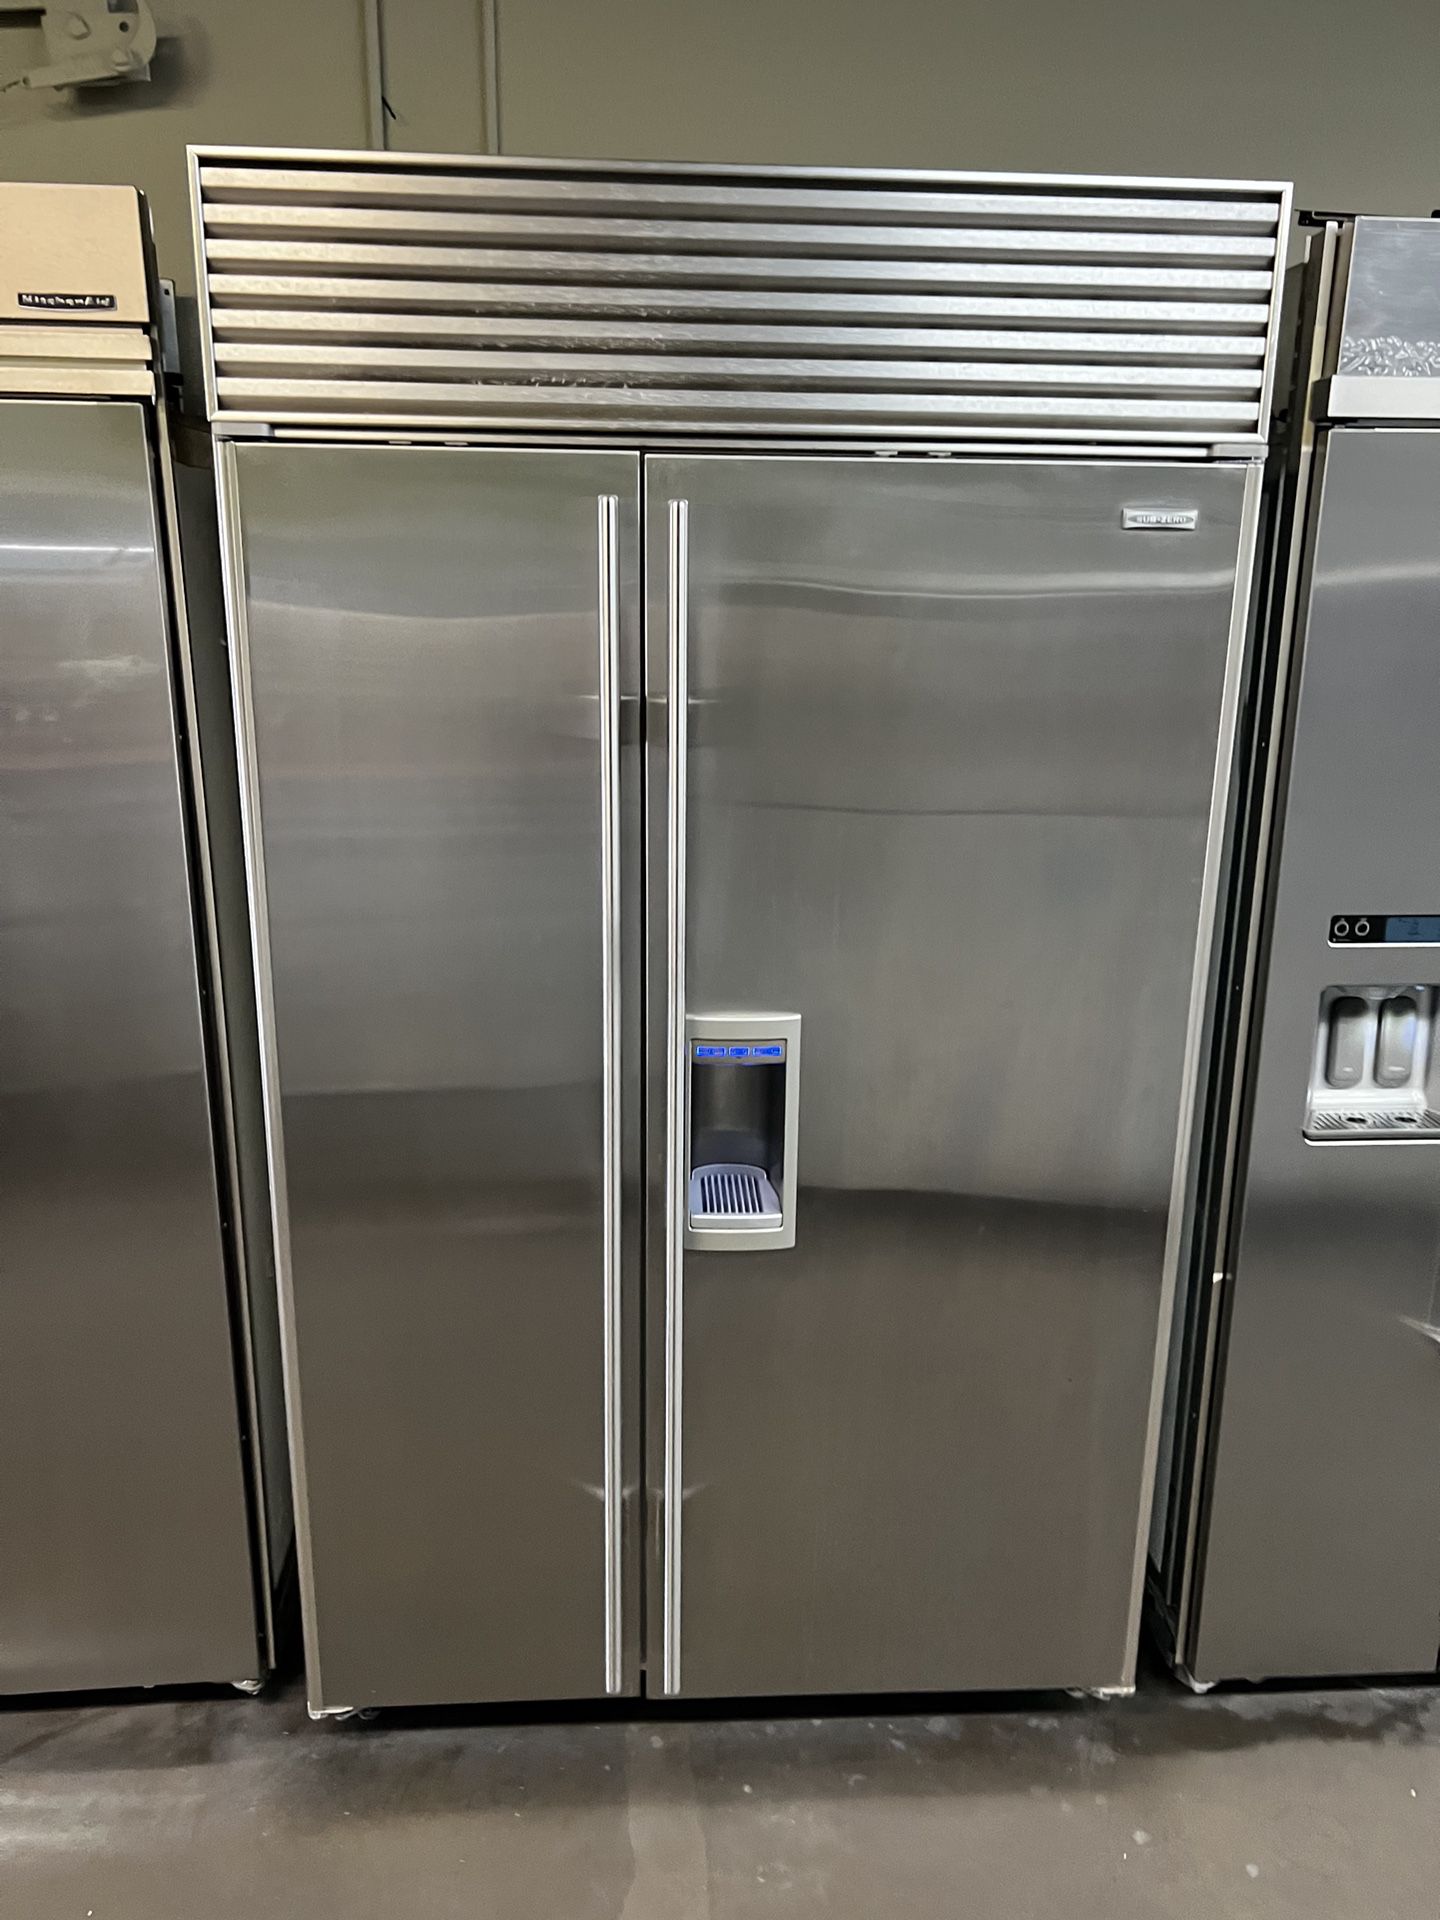 Sub Zero 48” Wide Stainless Steel Built In Refrigerator With Water And Ice Dispenser 